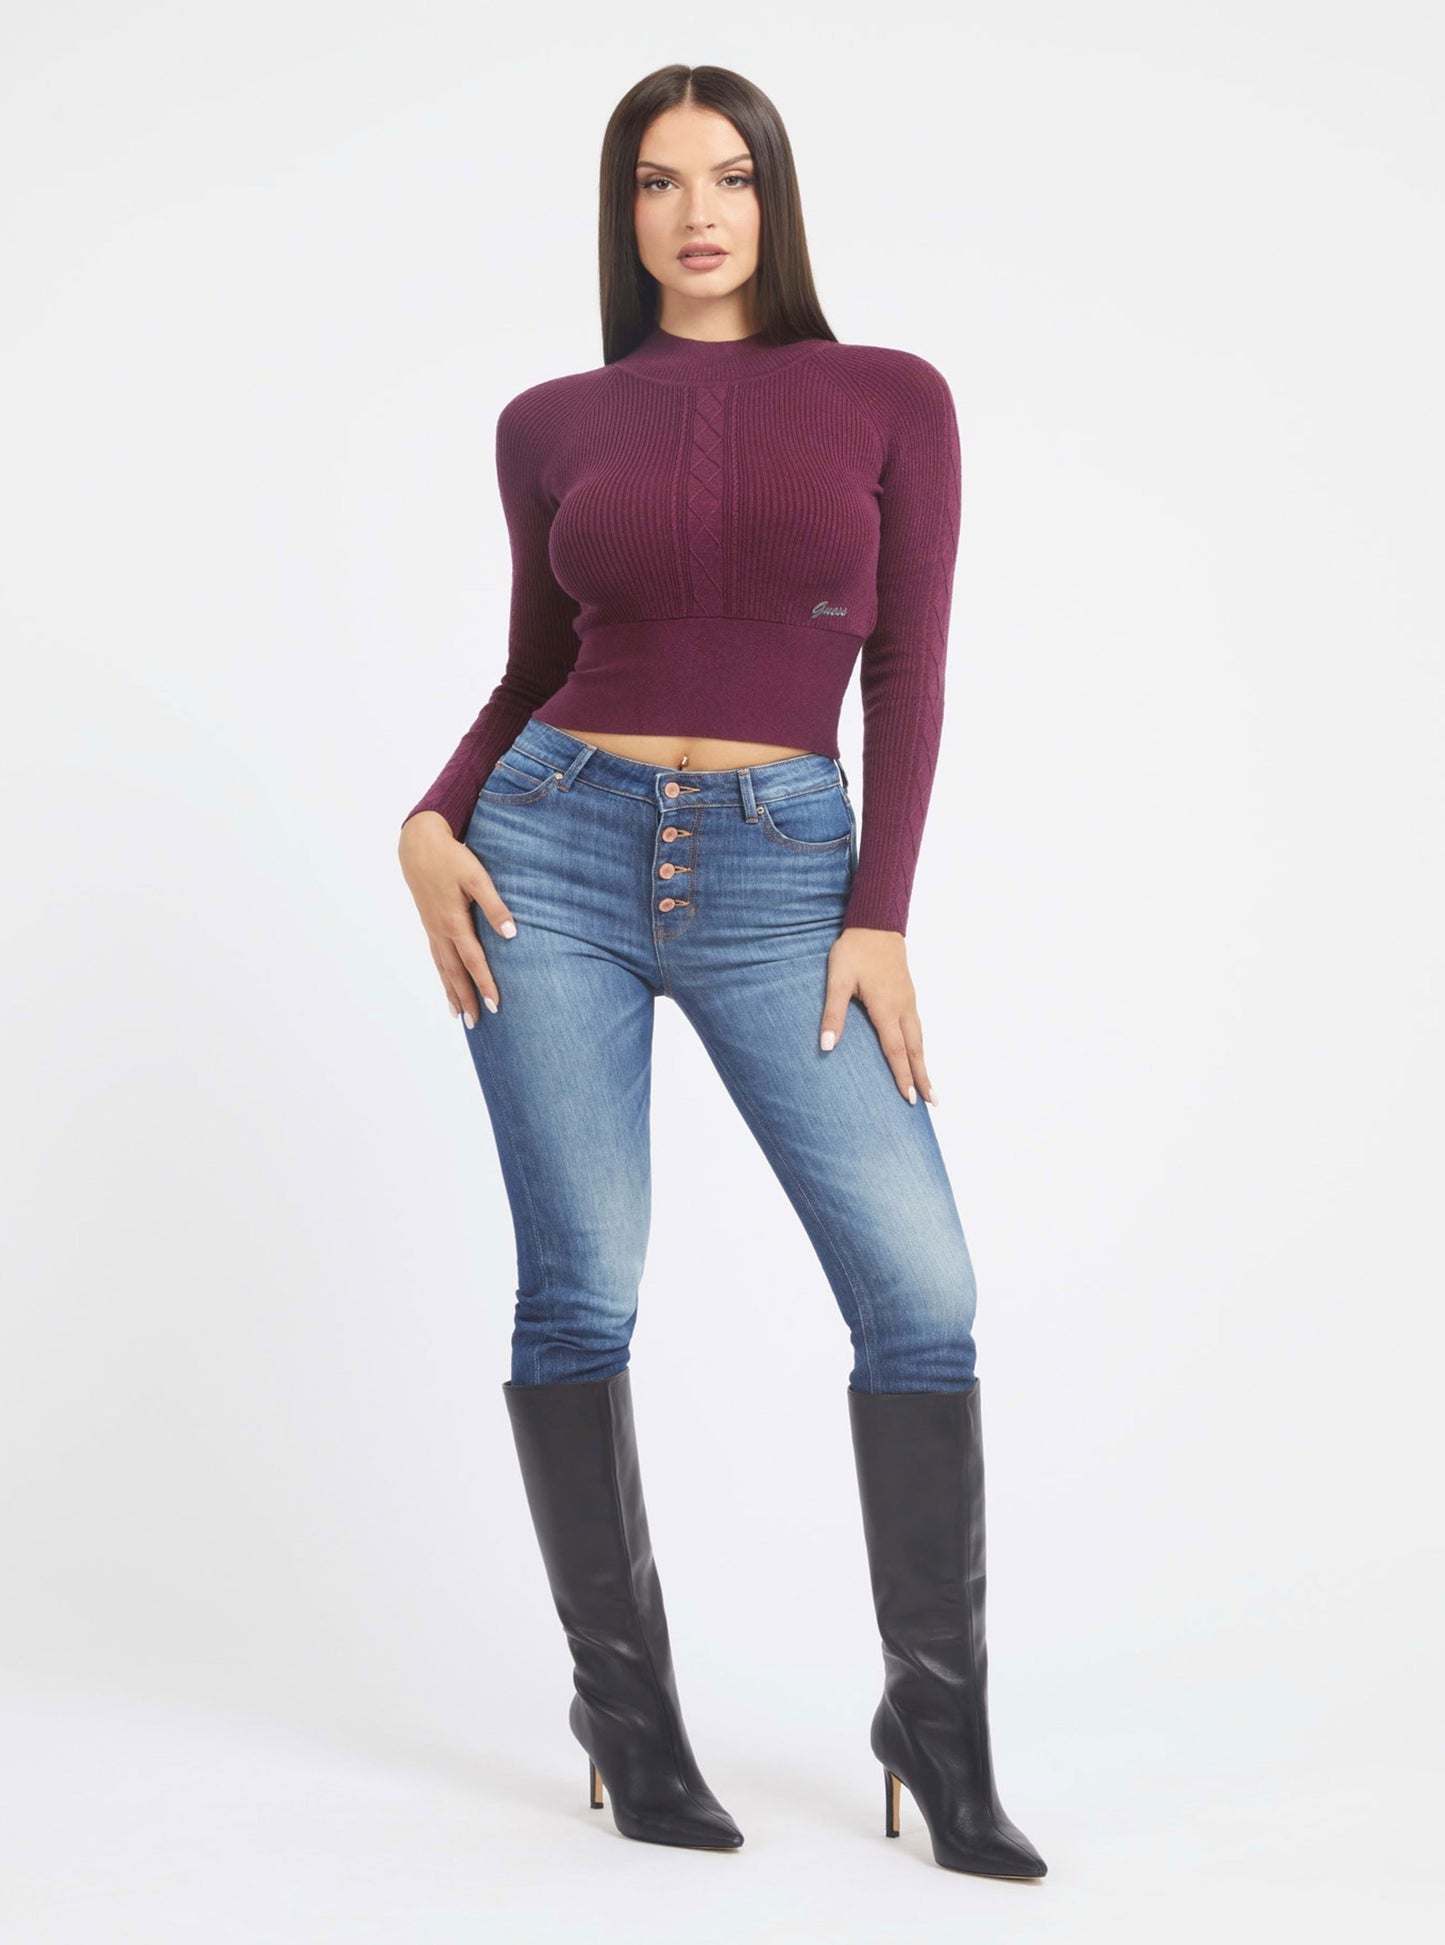 Purple Melodie Long Sleeve Knit Top | GUESS Women's Apparel | full view